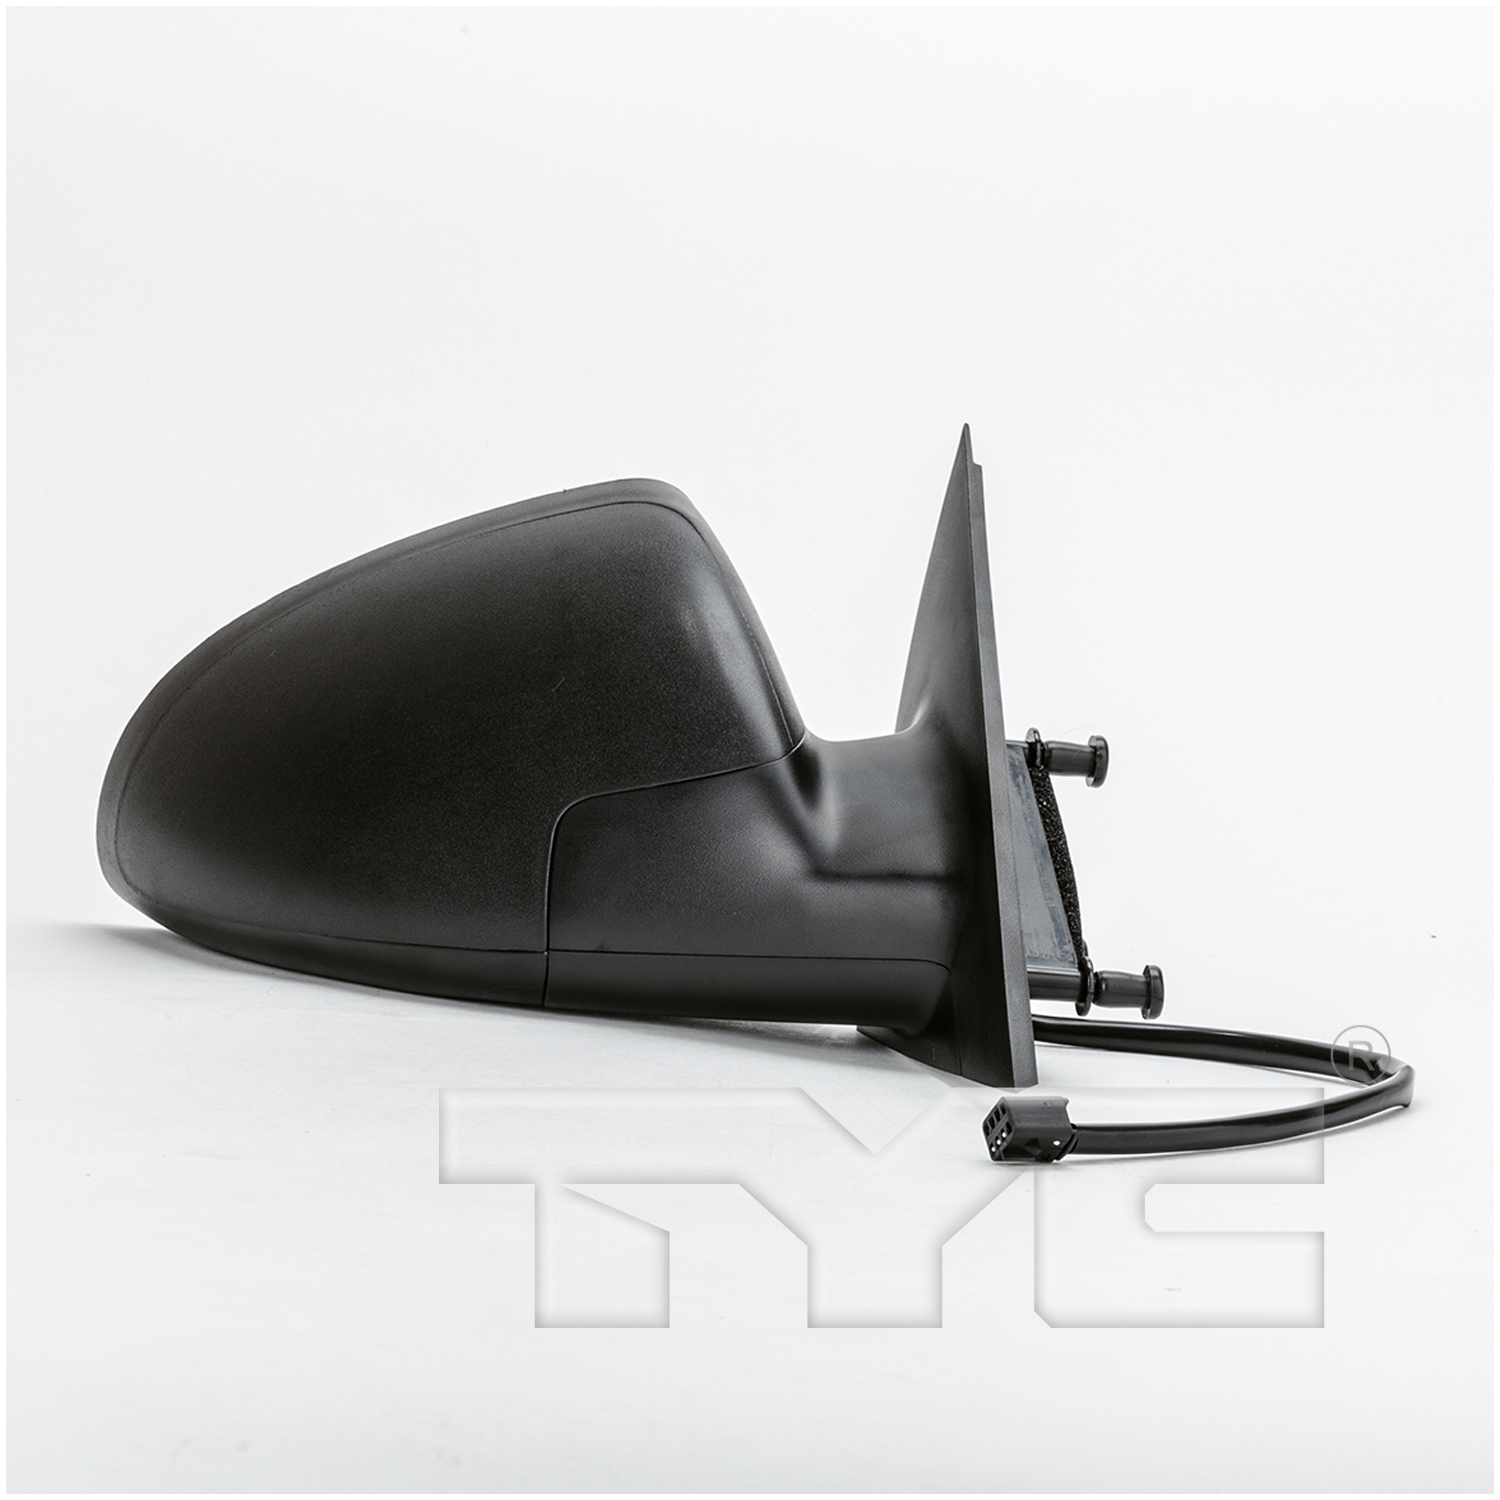 Aftermarket MIRRORS for PONTIAC - G6, G6,05-09,RT Mirror outside rear view